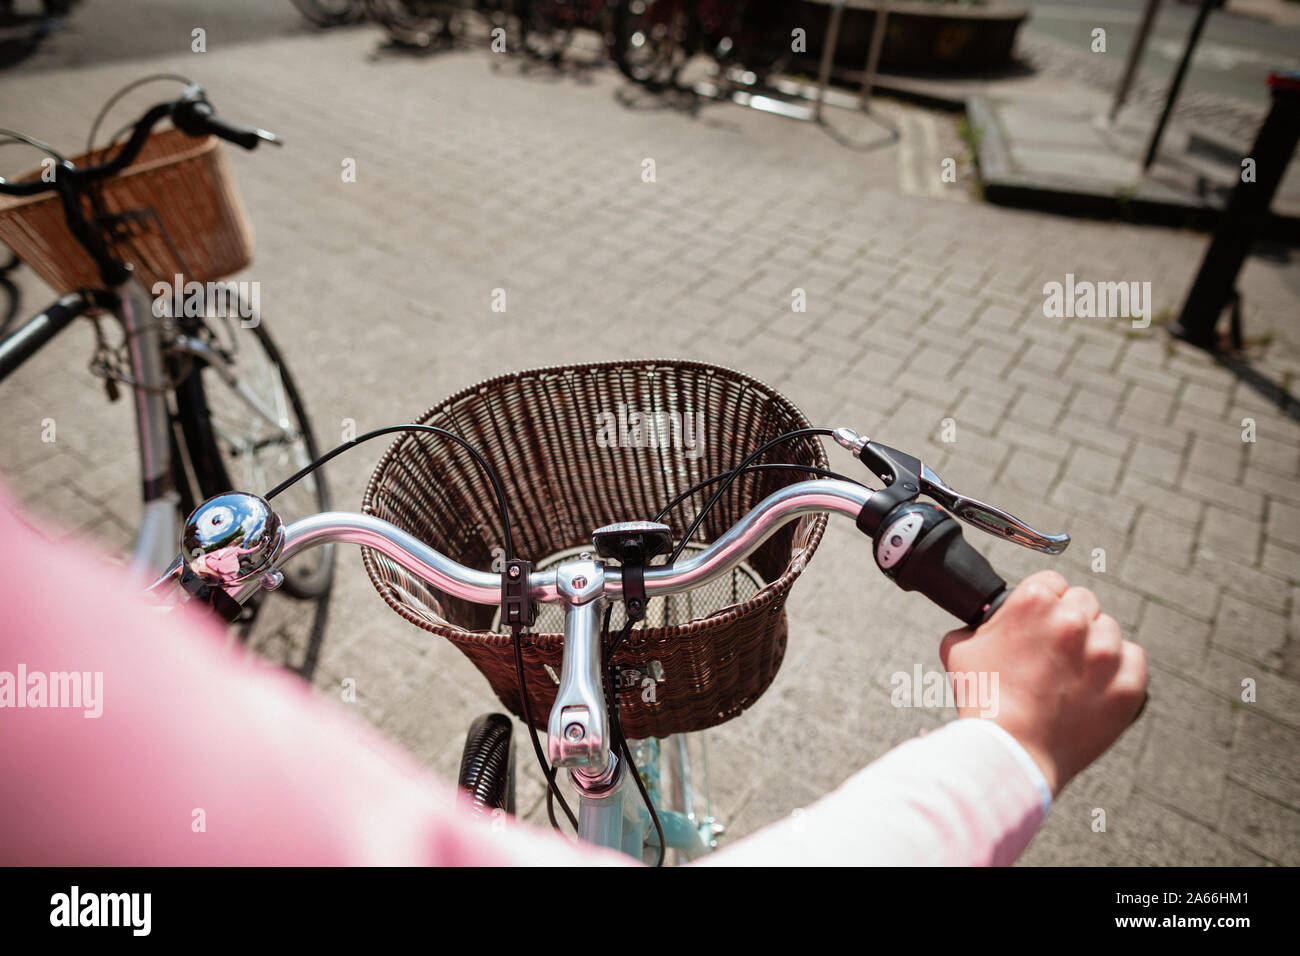 Over the shoulder view of a woman riding a bicycle. The main focus is on the front of the bicycle and its basket. Stock Photo